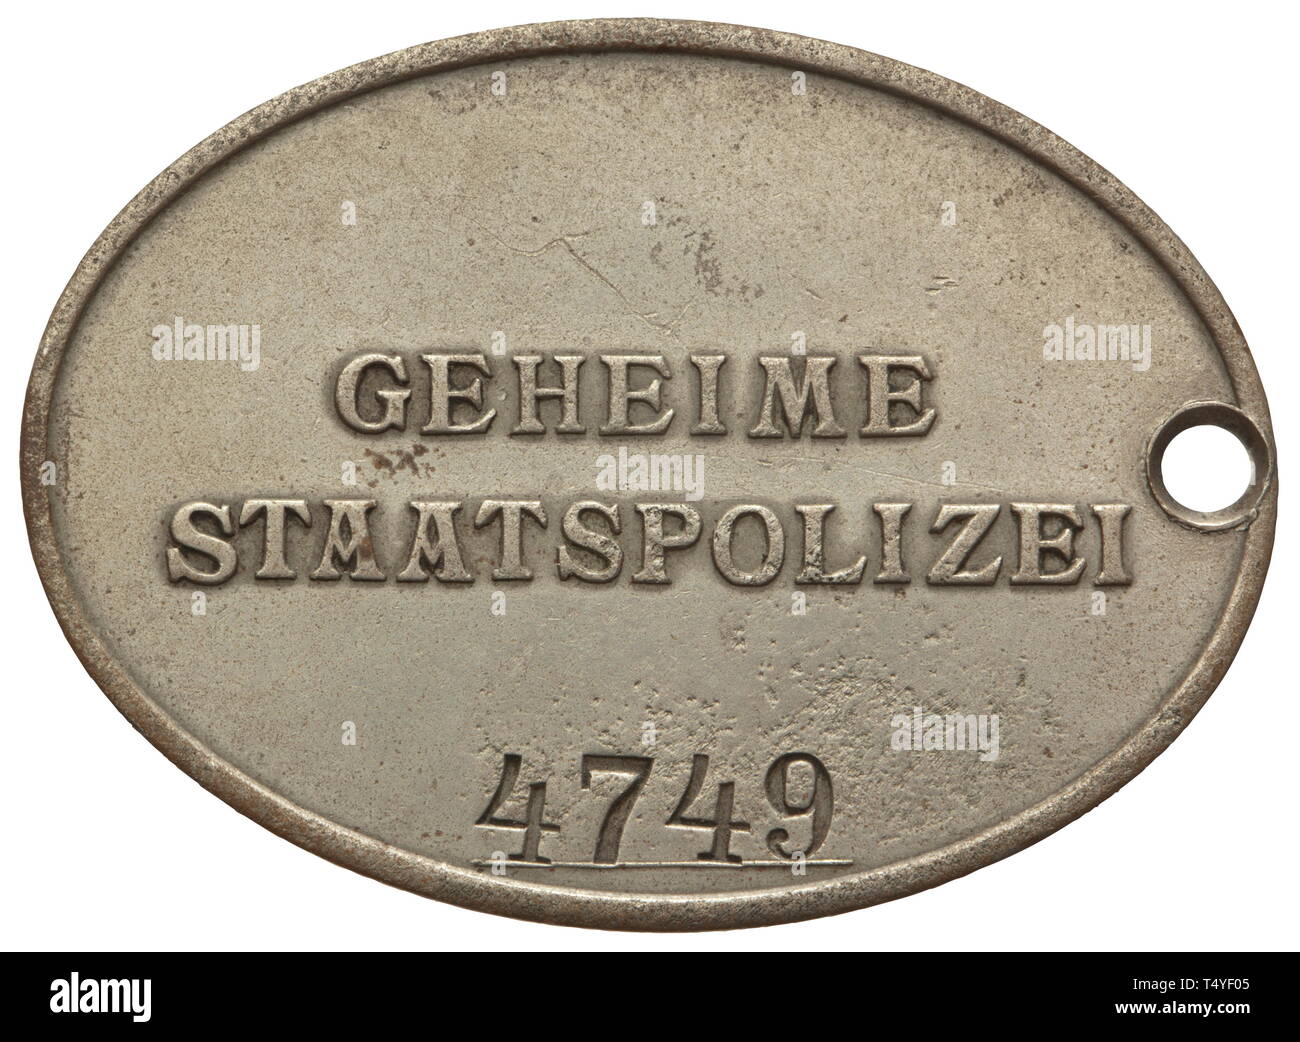 An identity badge of a GESTAPO member. Oval badge of nickel silver, the obverse with a raised national eagle, reverse raised lettering 'GEHEIME STAATSPOLIZEI', below this the struck number '4749' on a raised line. Without chain for wear. Dimensions 37 x 51 mm, weight ca. 25 g. historic, historical, 20th century, Additional-Rights-Clearance-Info-Not-Available Stock Photo